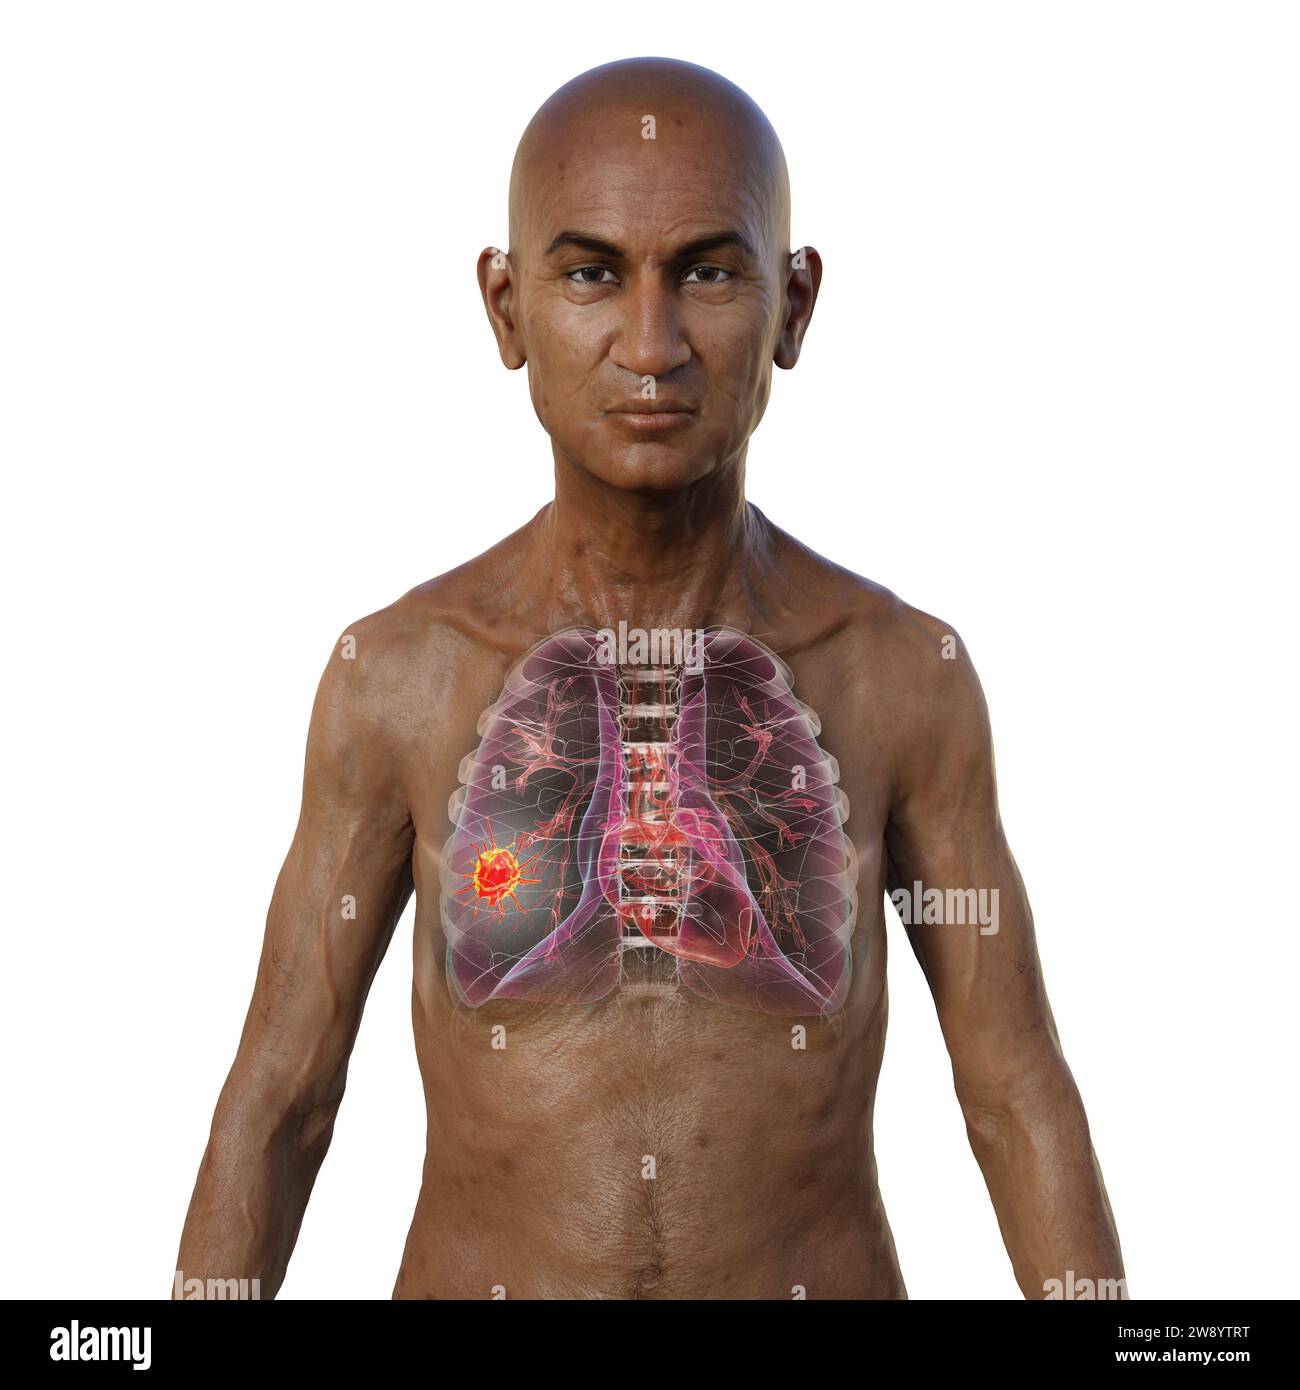 Man with lung cancer, illustration Stock Photo